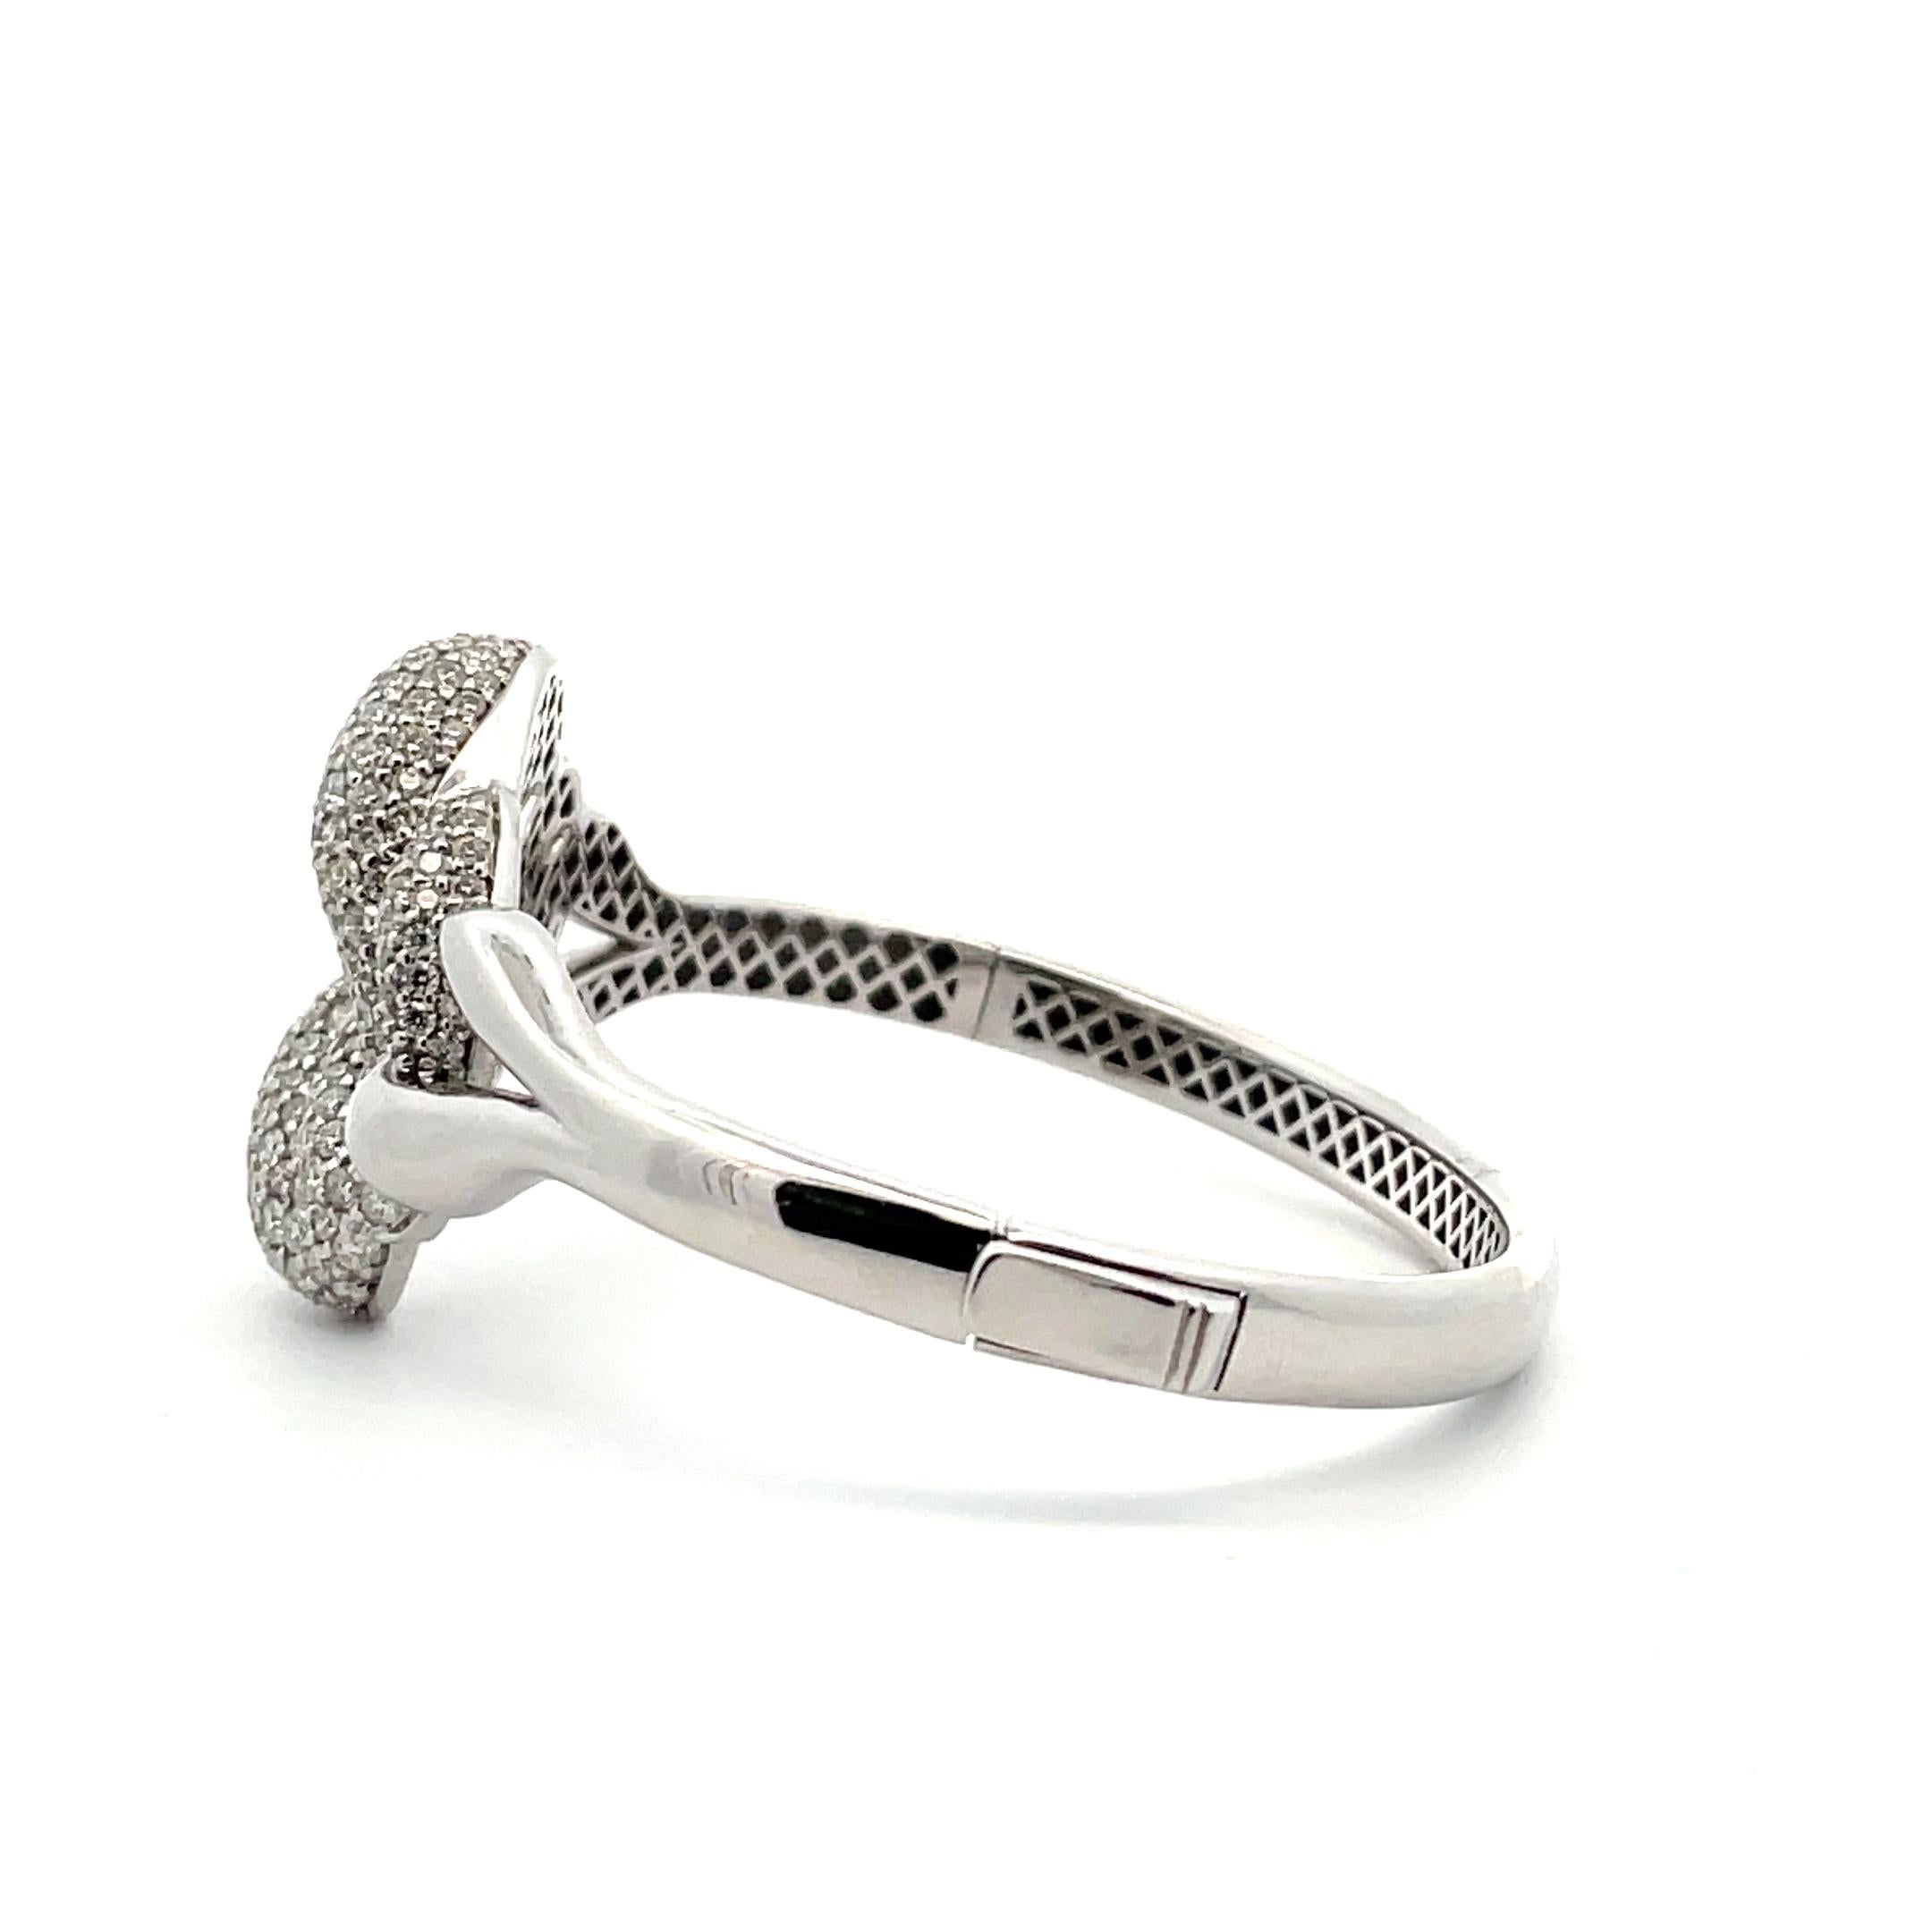 Round Cut 4.93ct, Diamond Cluster Knot Chain Link Bangle in 14k White Gold